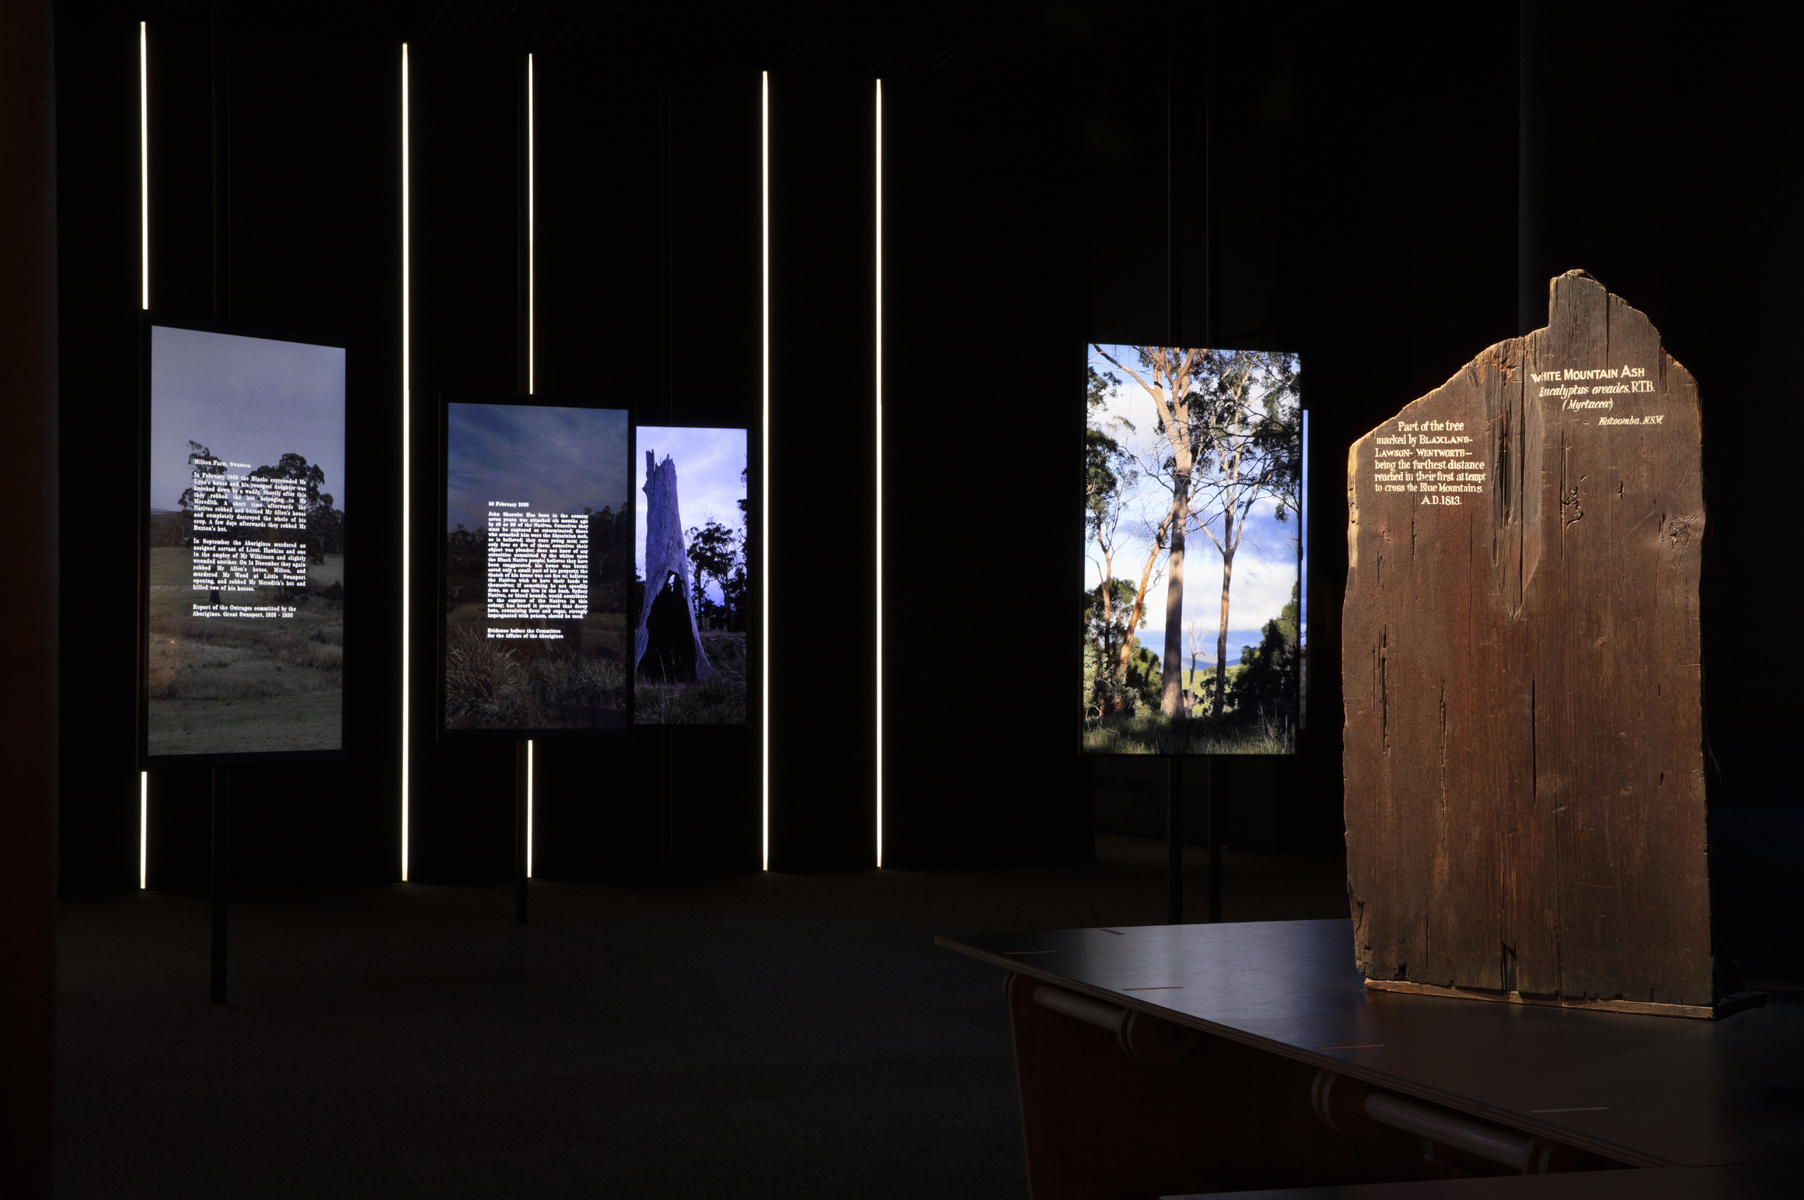 View of <em>Eucalyptusdom</em> showing commissioned work, <em>Witness</em> by Julie Gough and a Mountain Ash marker from the Museum’s collection. Photographed by Zan Wimberley